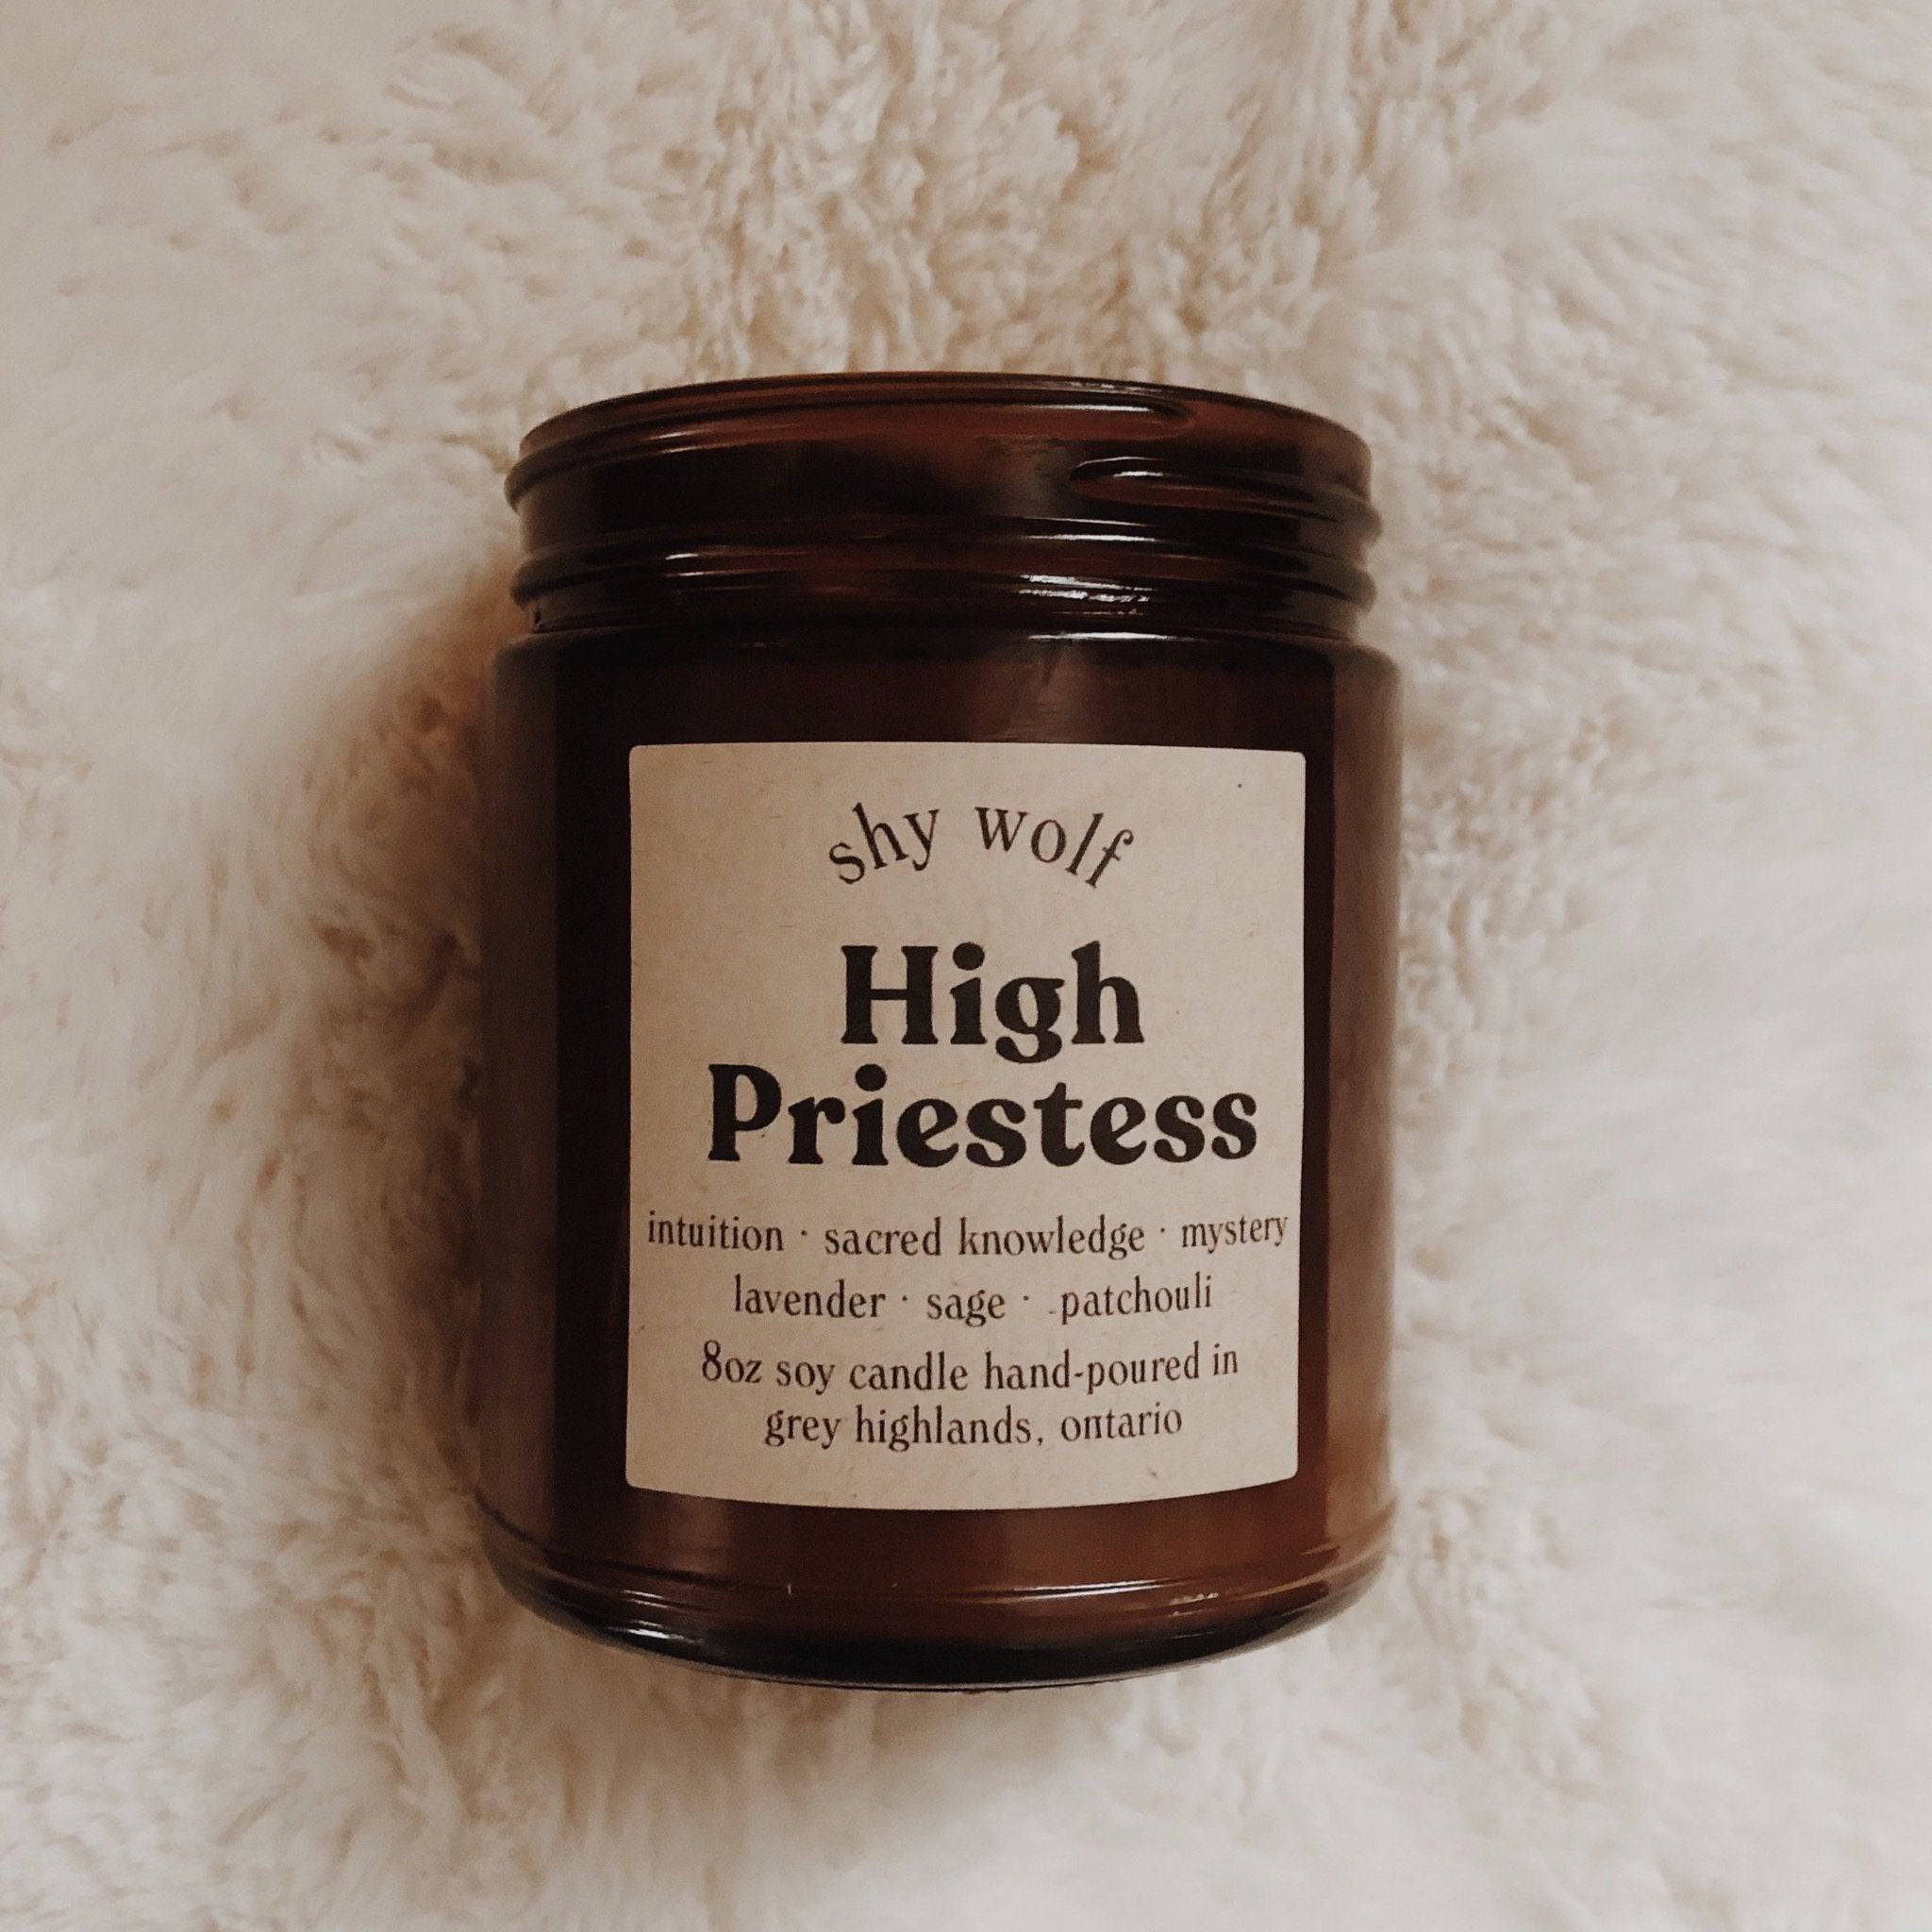 HIGH PRIESTESS CANDLE - Out of the Blue